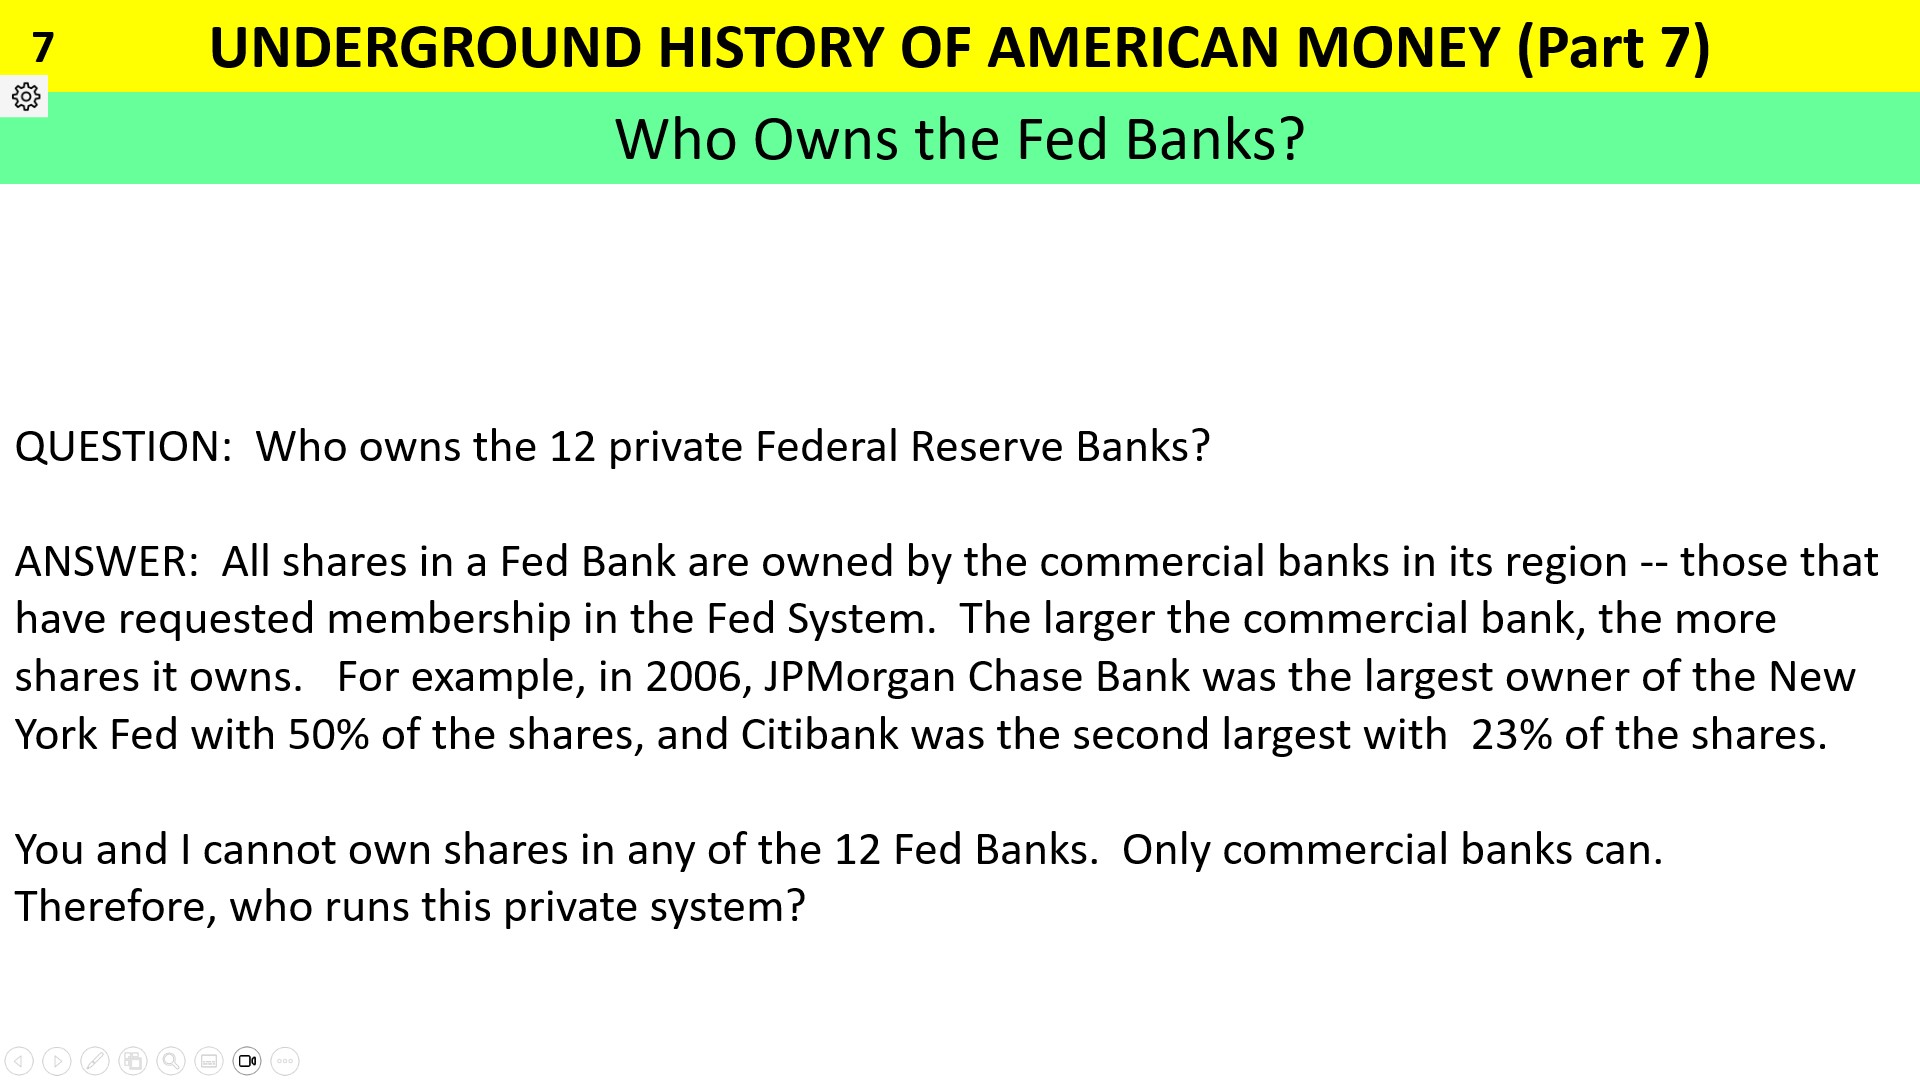 The Federal Reserve regional banks are owned by the commercial banks in the region.